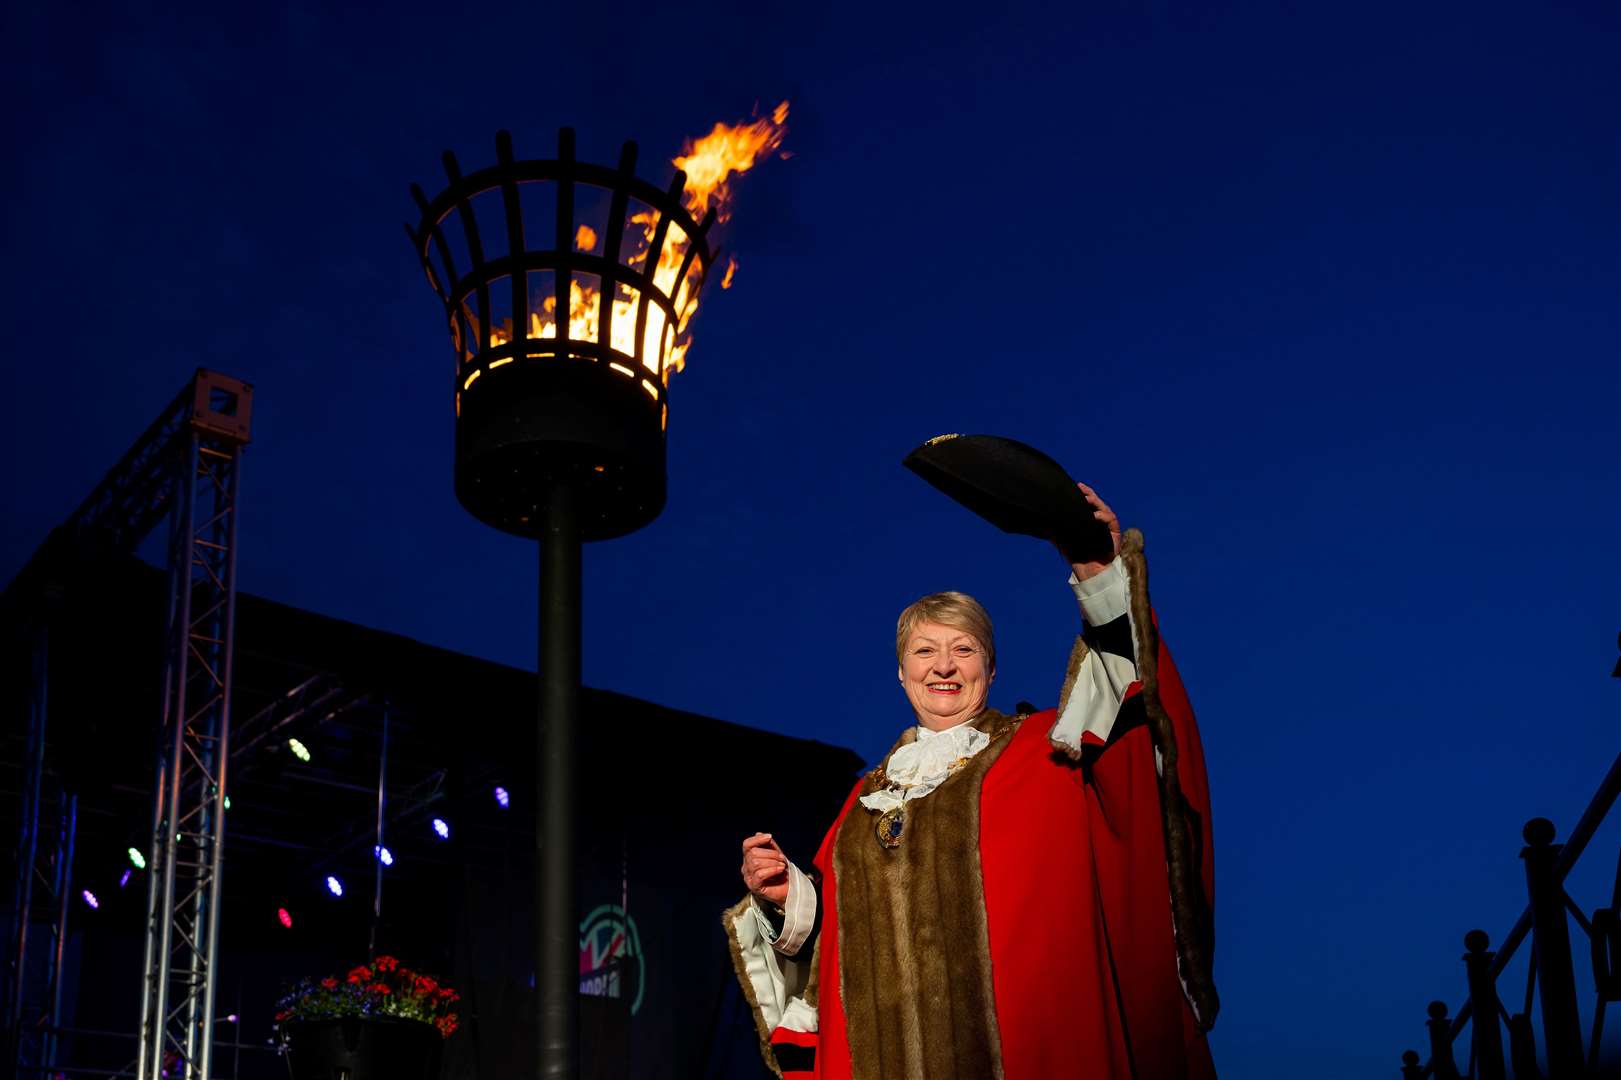 Cllr Bambridge lighting the beacon at the Queen’s Platinum Jubilee celebrations in Lynn